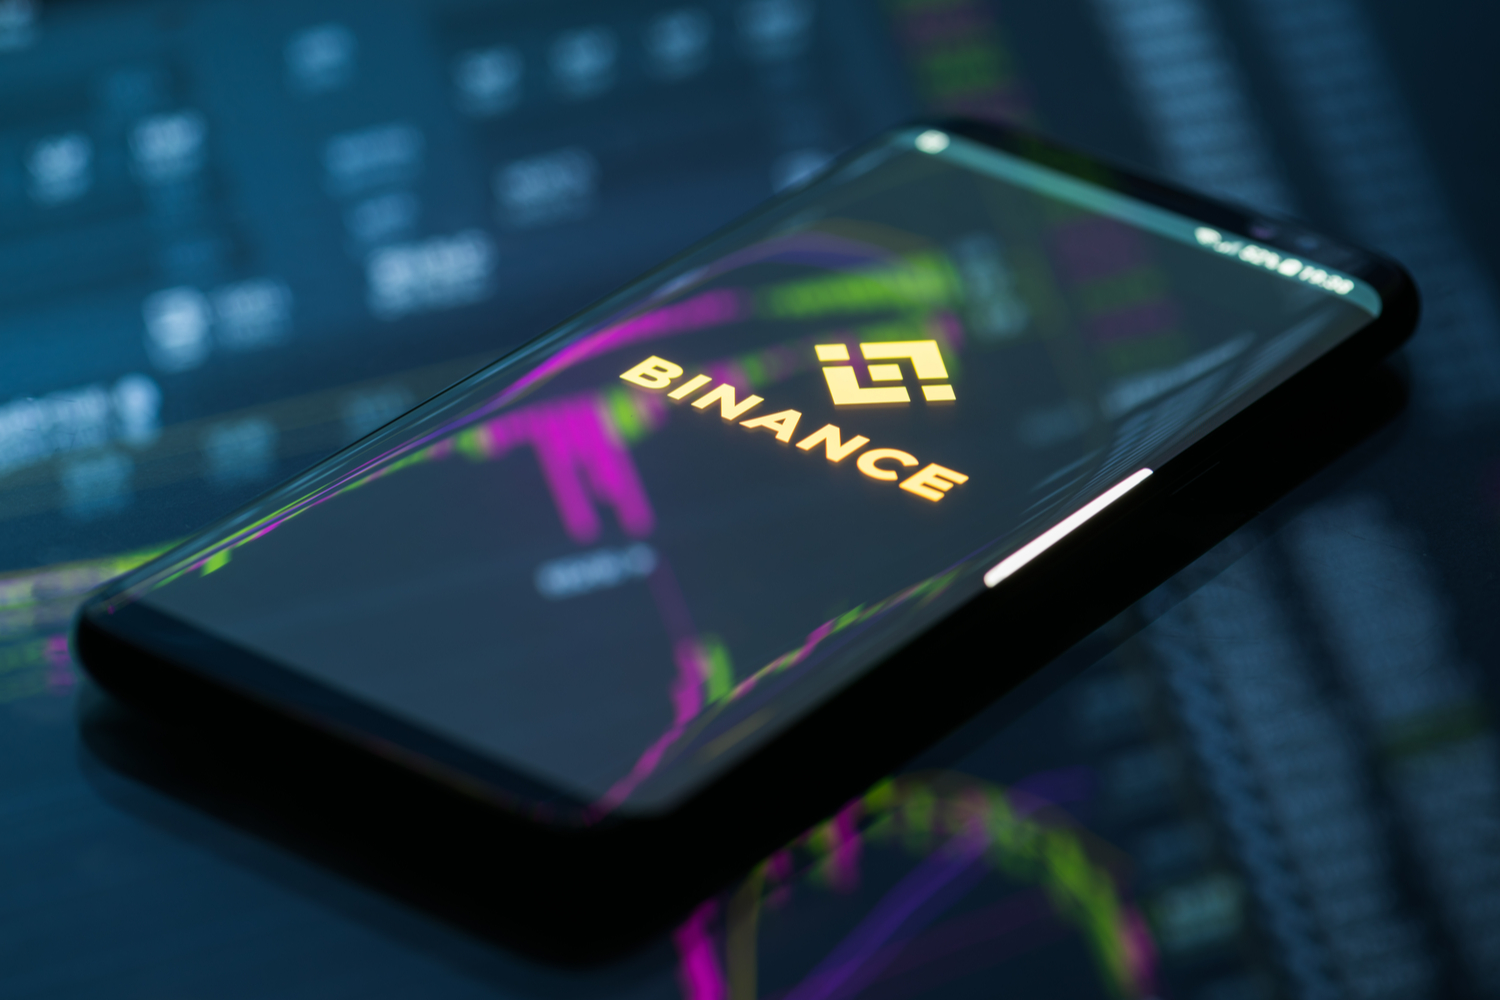 Binance Adds 167 Fiat Payment Options Through Integration With P2P Exchange Paxful